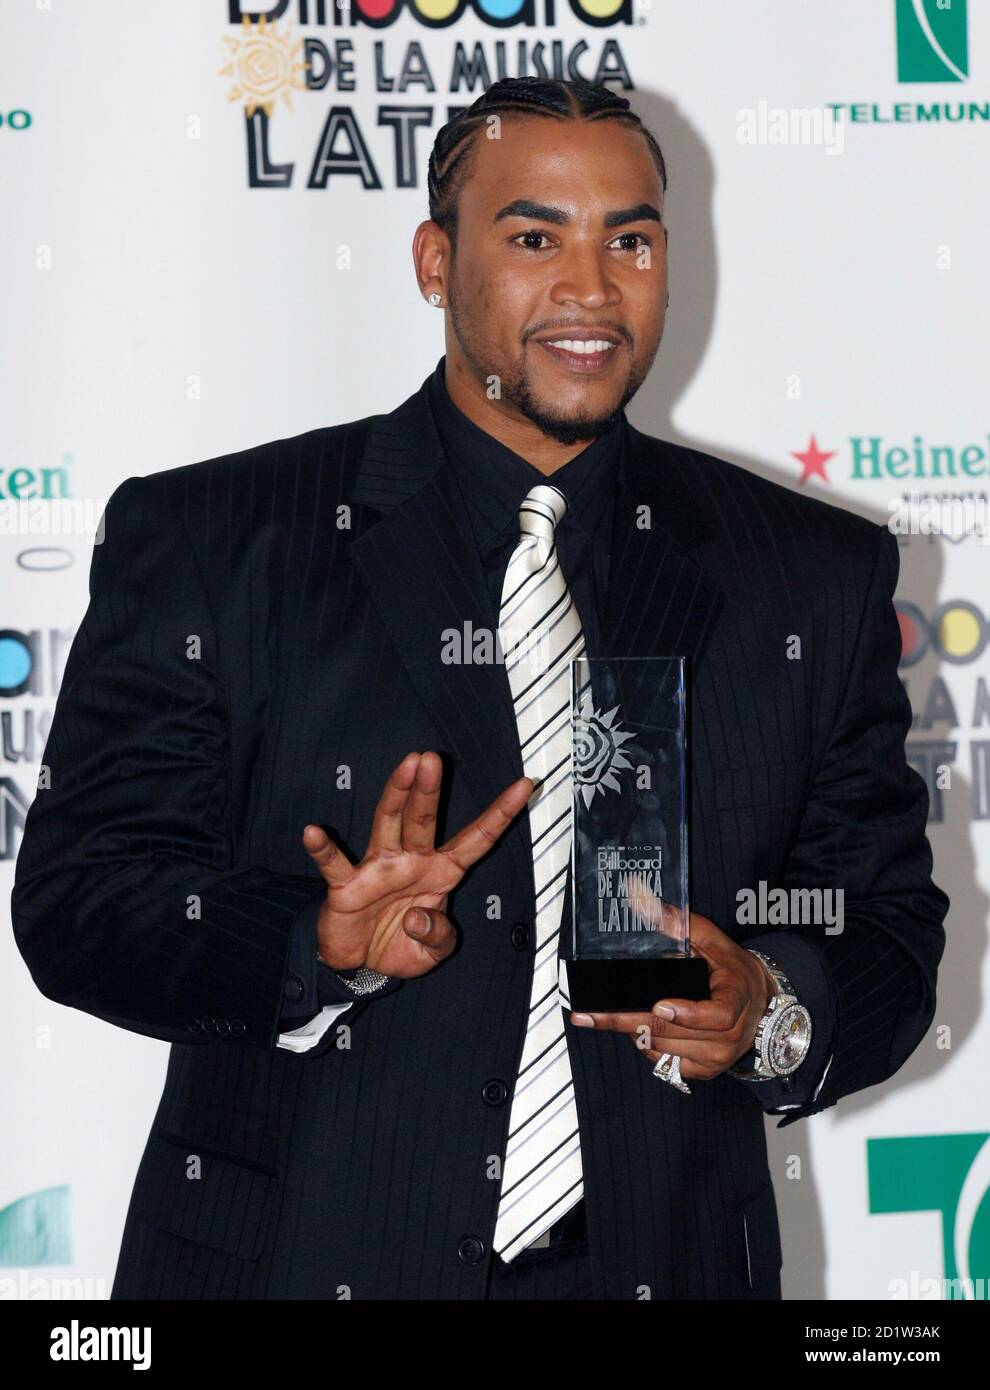 Don Omar Poses With His Award For Reggaeton Album Of The Year For The Album King Of Kings Backstage At The 07 Billboard Latin Music Awards In Coral Gables Florida April 26